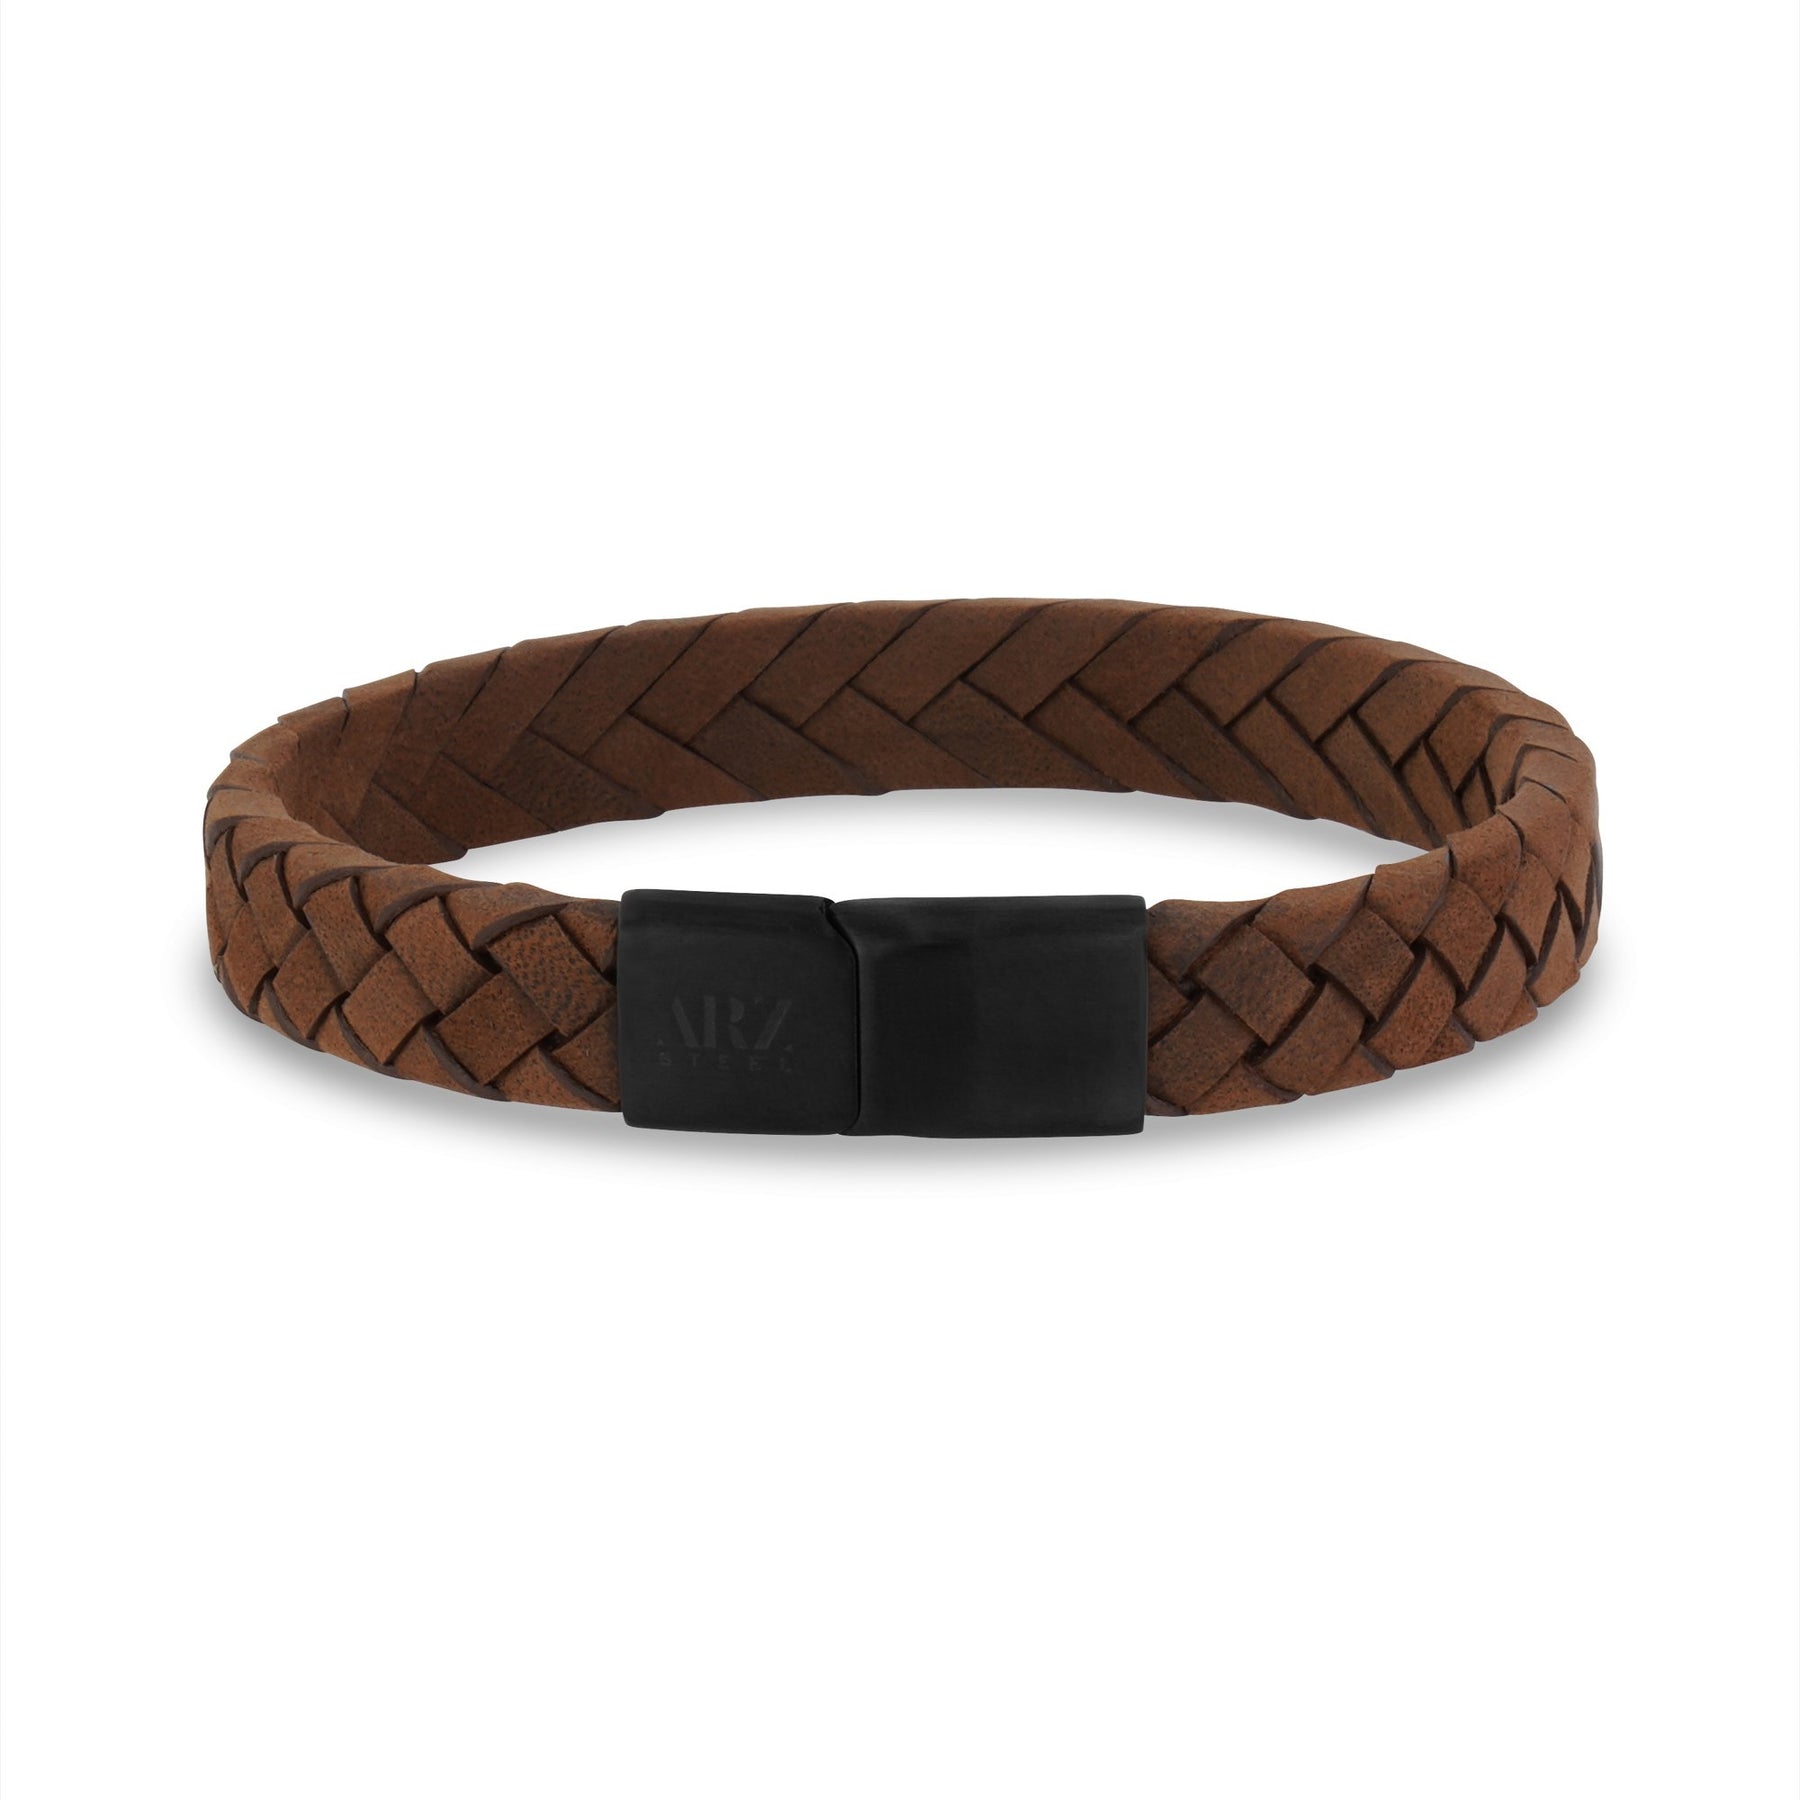 Personalized Mens 10mm Flat Italian Braided Leather Bracelet 7.5 Inches / Black